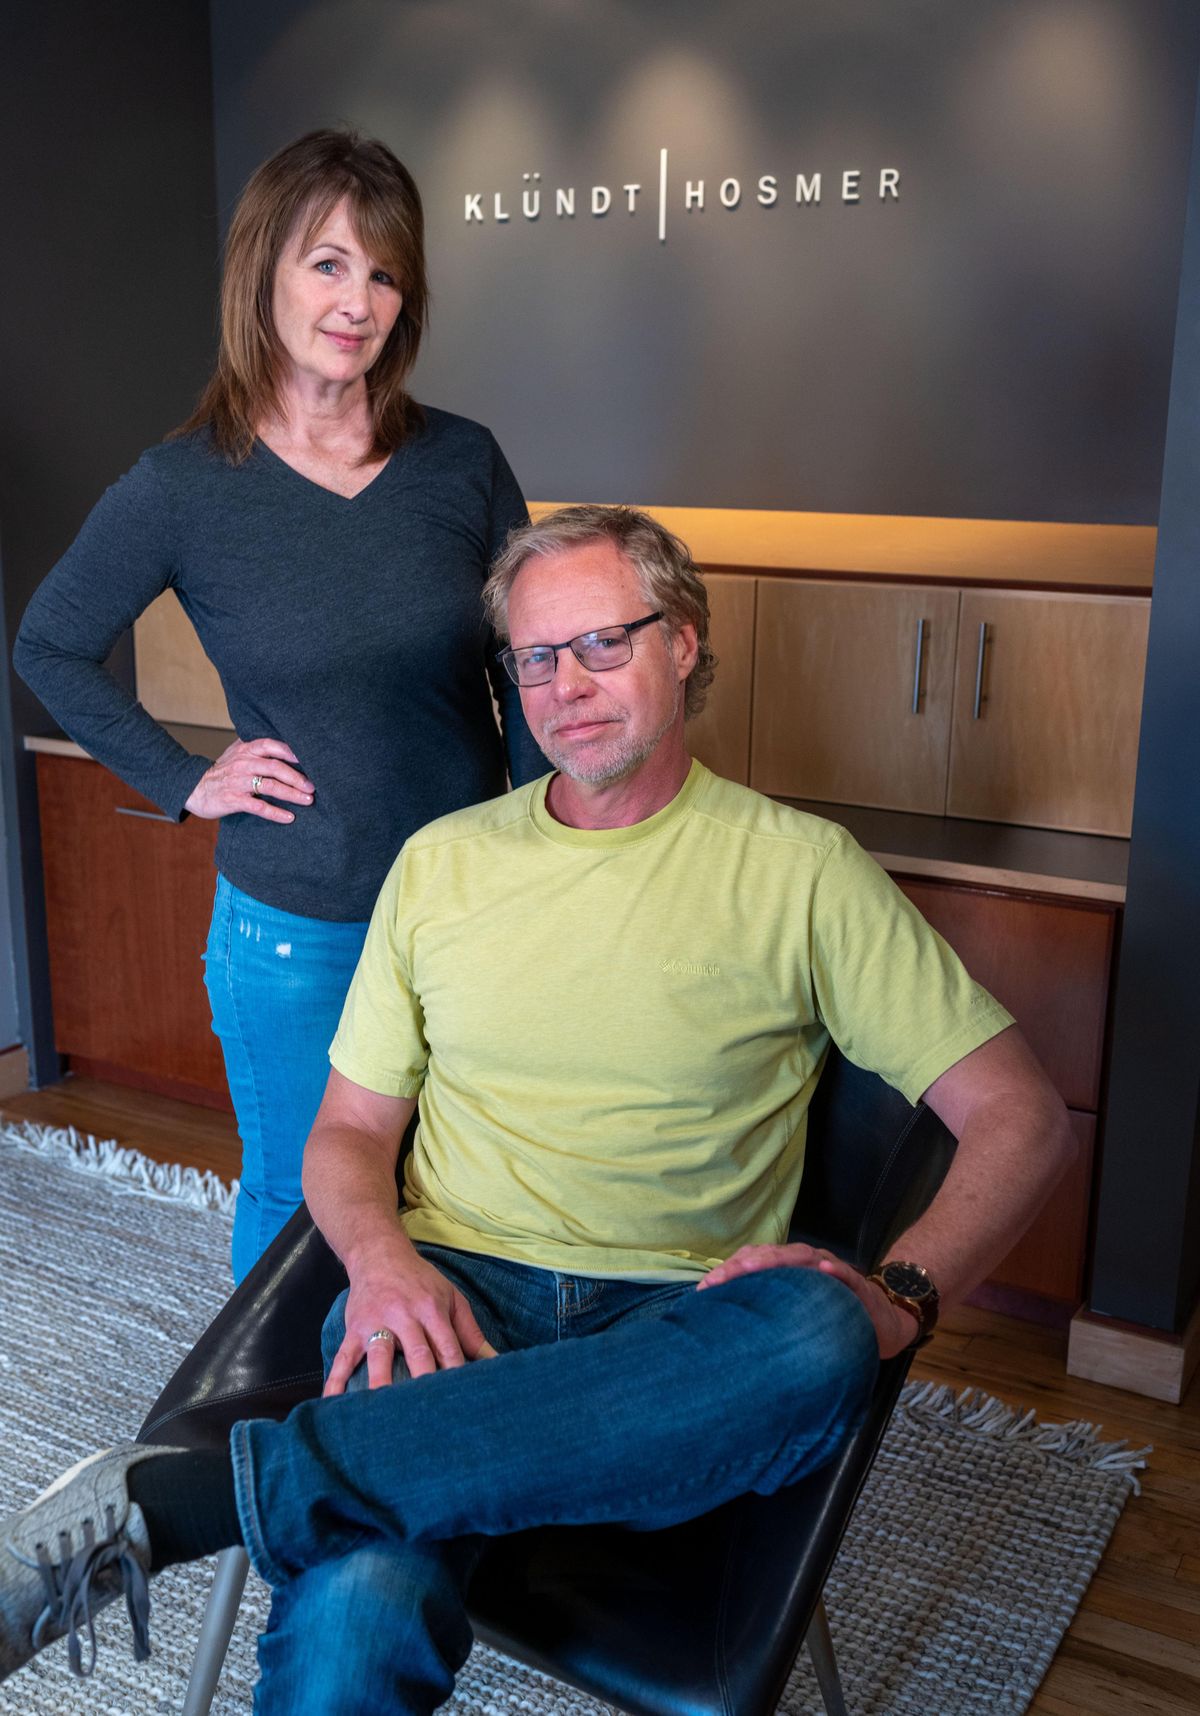 CEO Jean Klundt and Darren Klundt, chief creative officer, at Klundt Hosmer say their business was hit hard by multiple fraudulent benefits claims for unemployment. (Colin Mulvany / The Spokesman-Review)